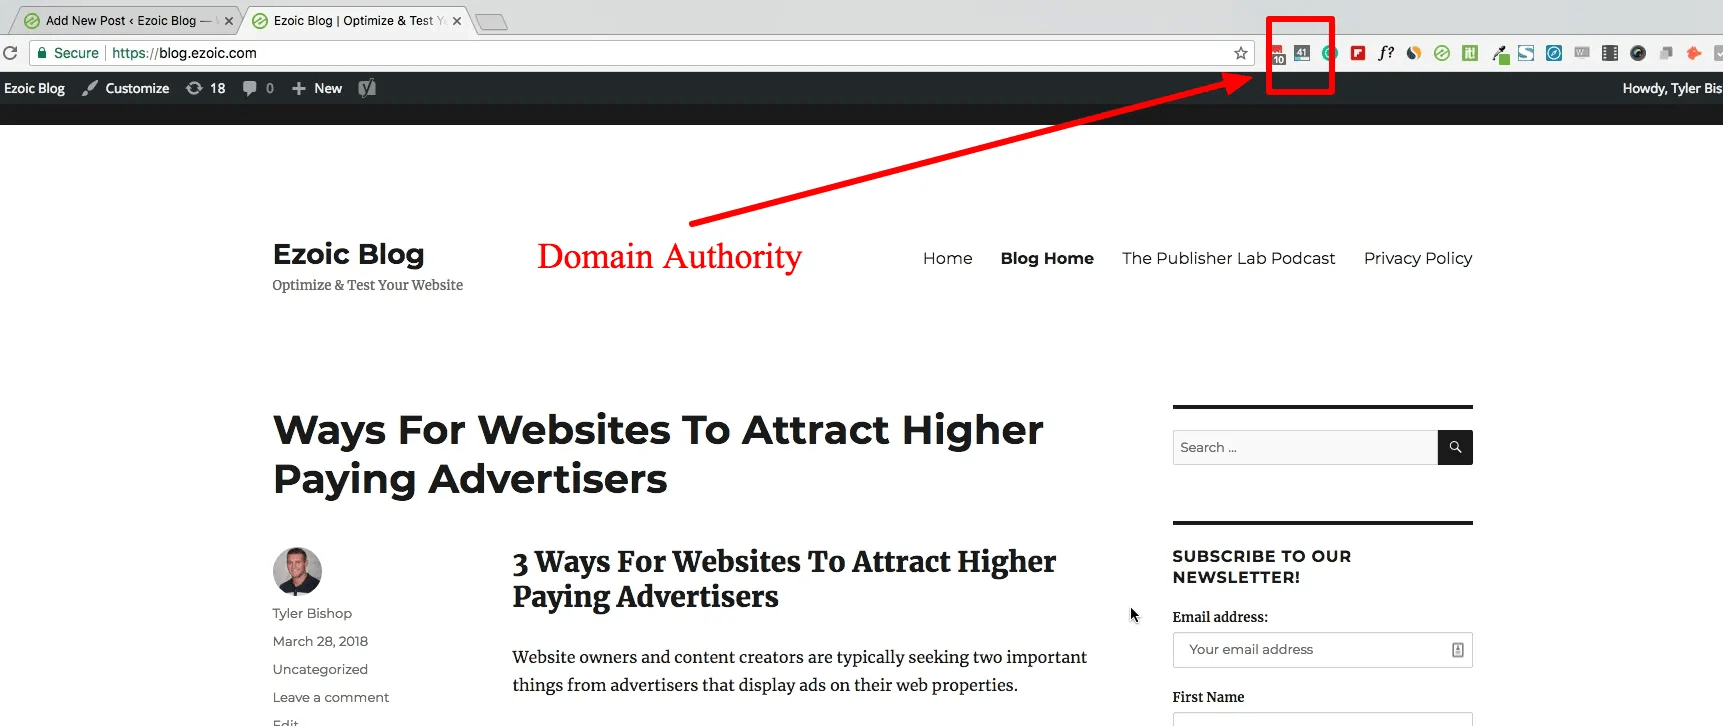 Domain Authority Is A Good Investment of Time In SEO